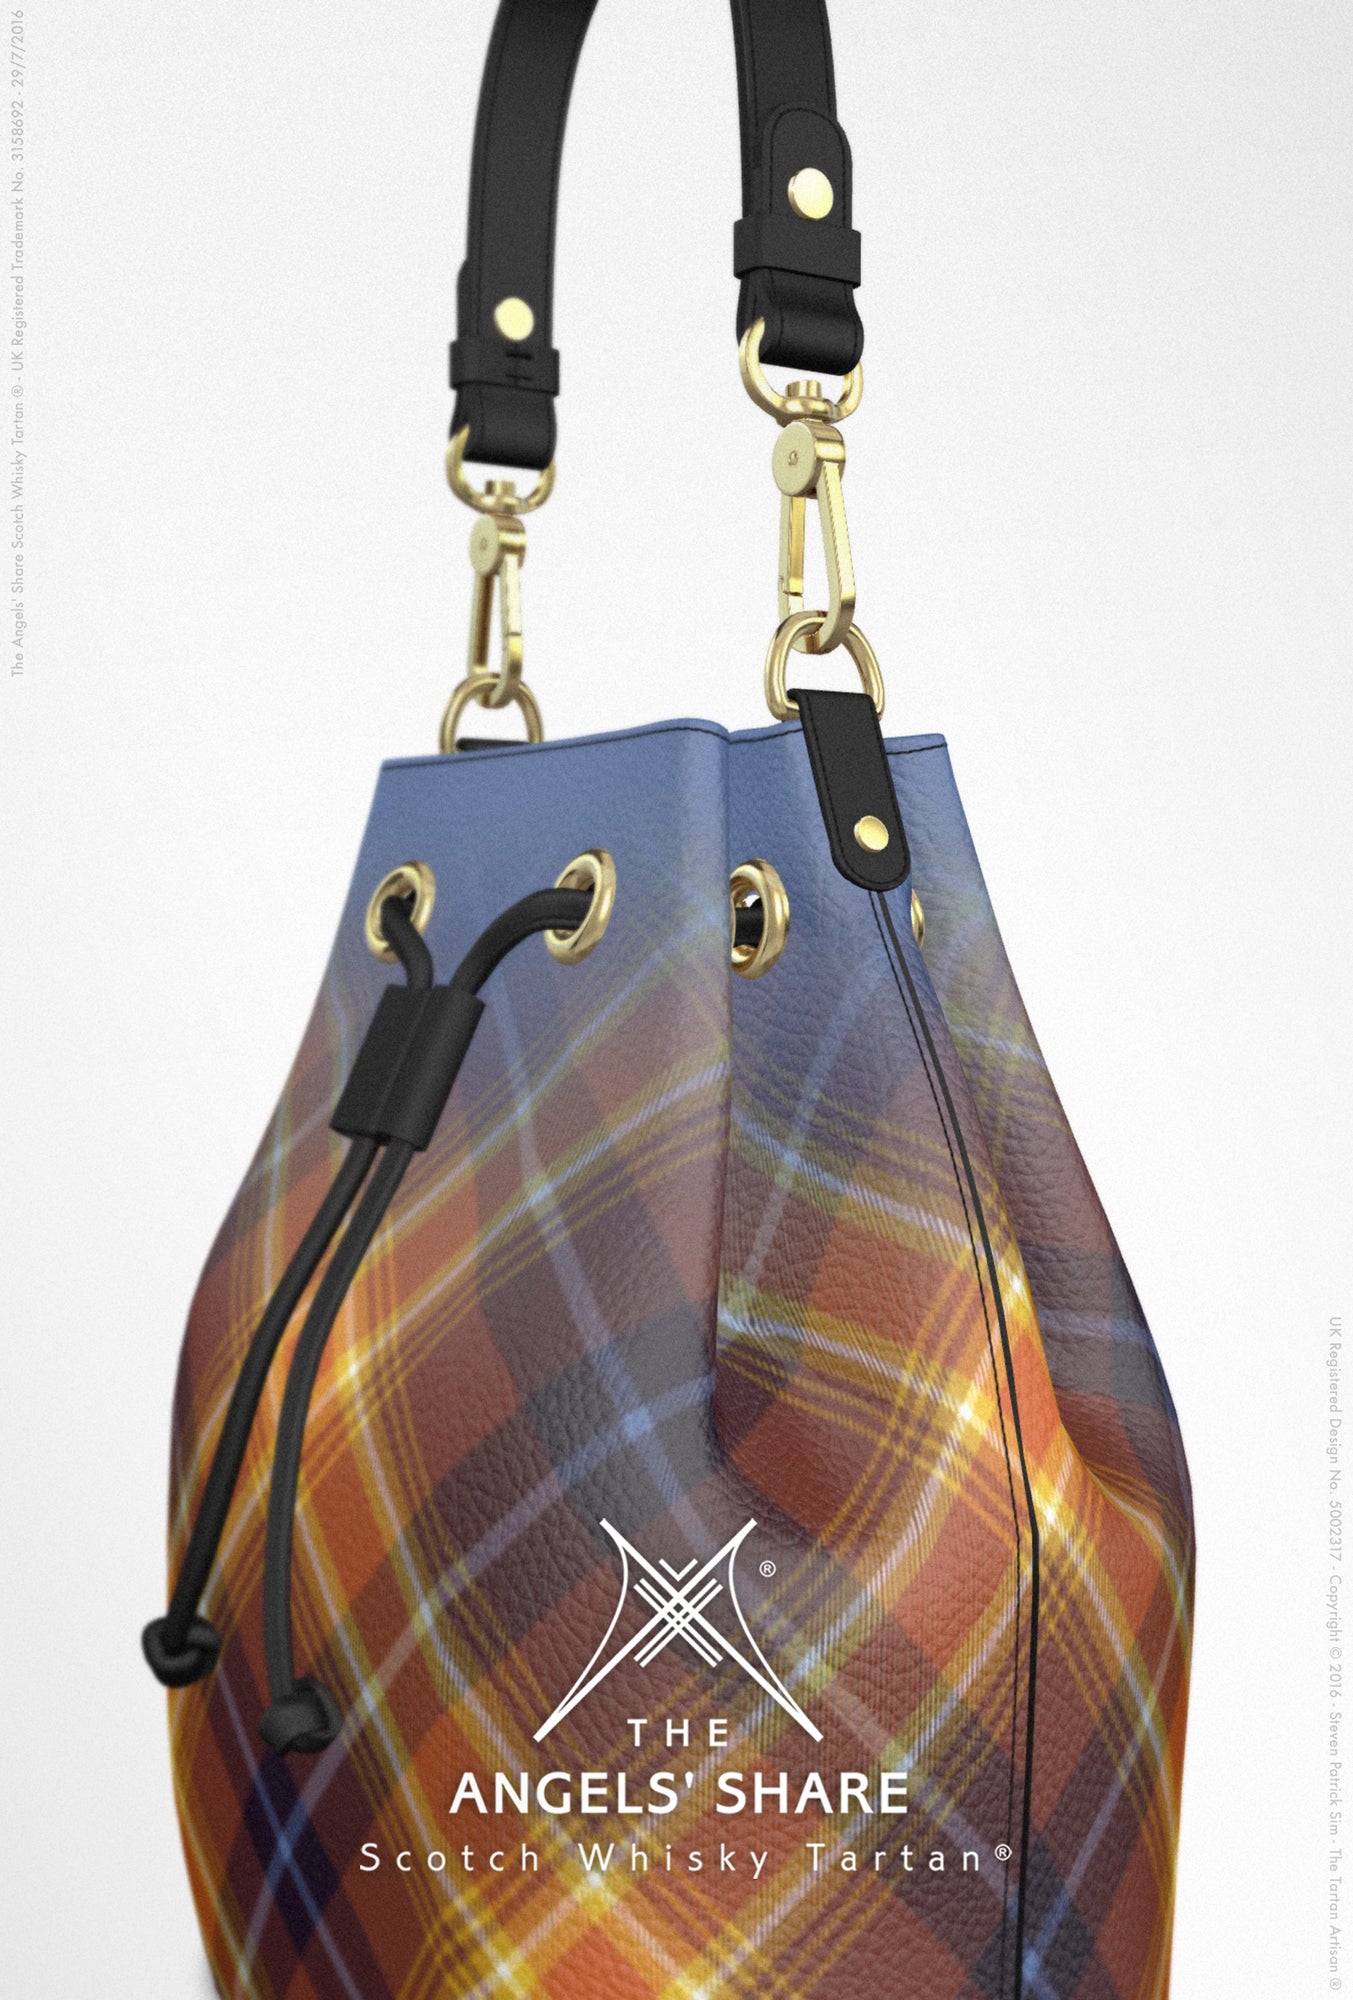 The Angels' Share Leather Bucket Designer Hand Bag - by Steven Patrick Sim, the Tartan Artisan - nappa leather